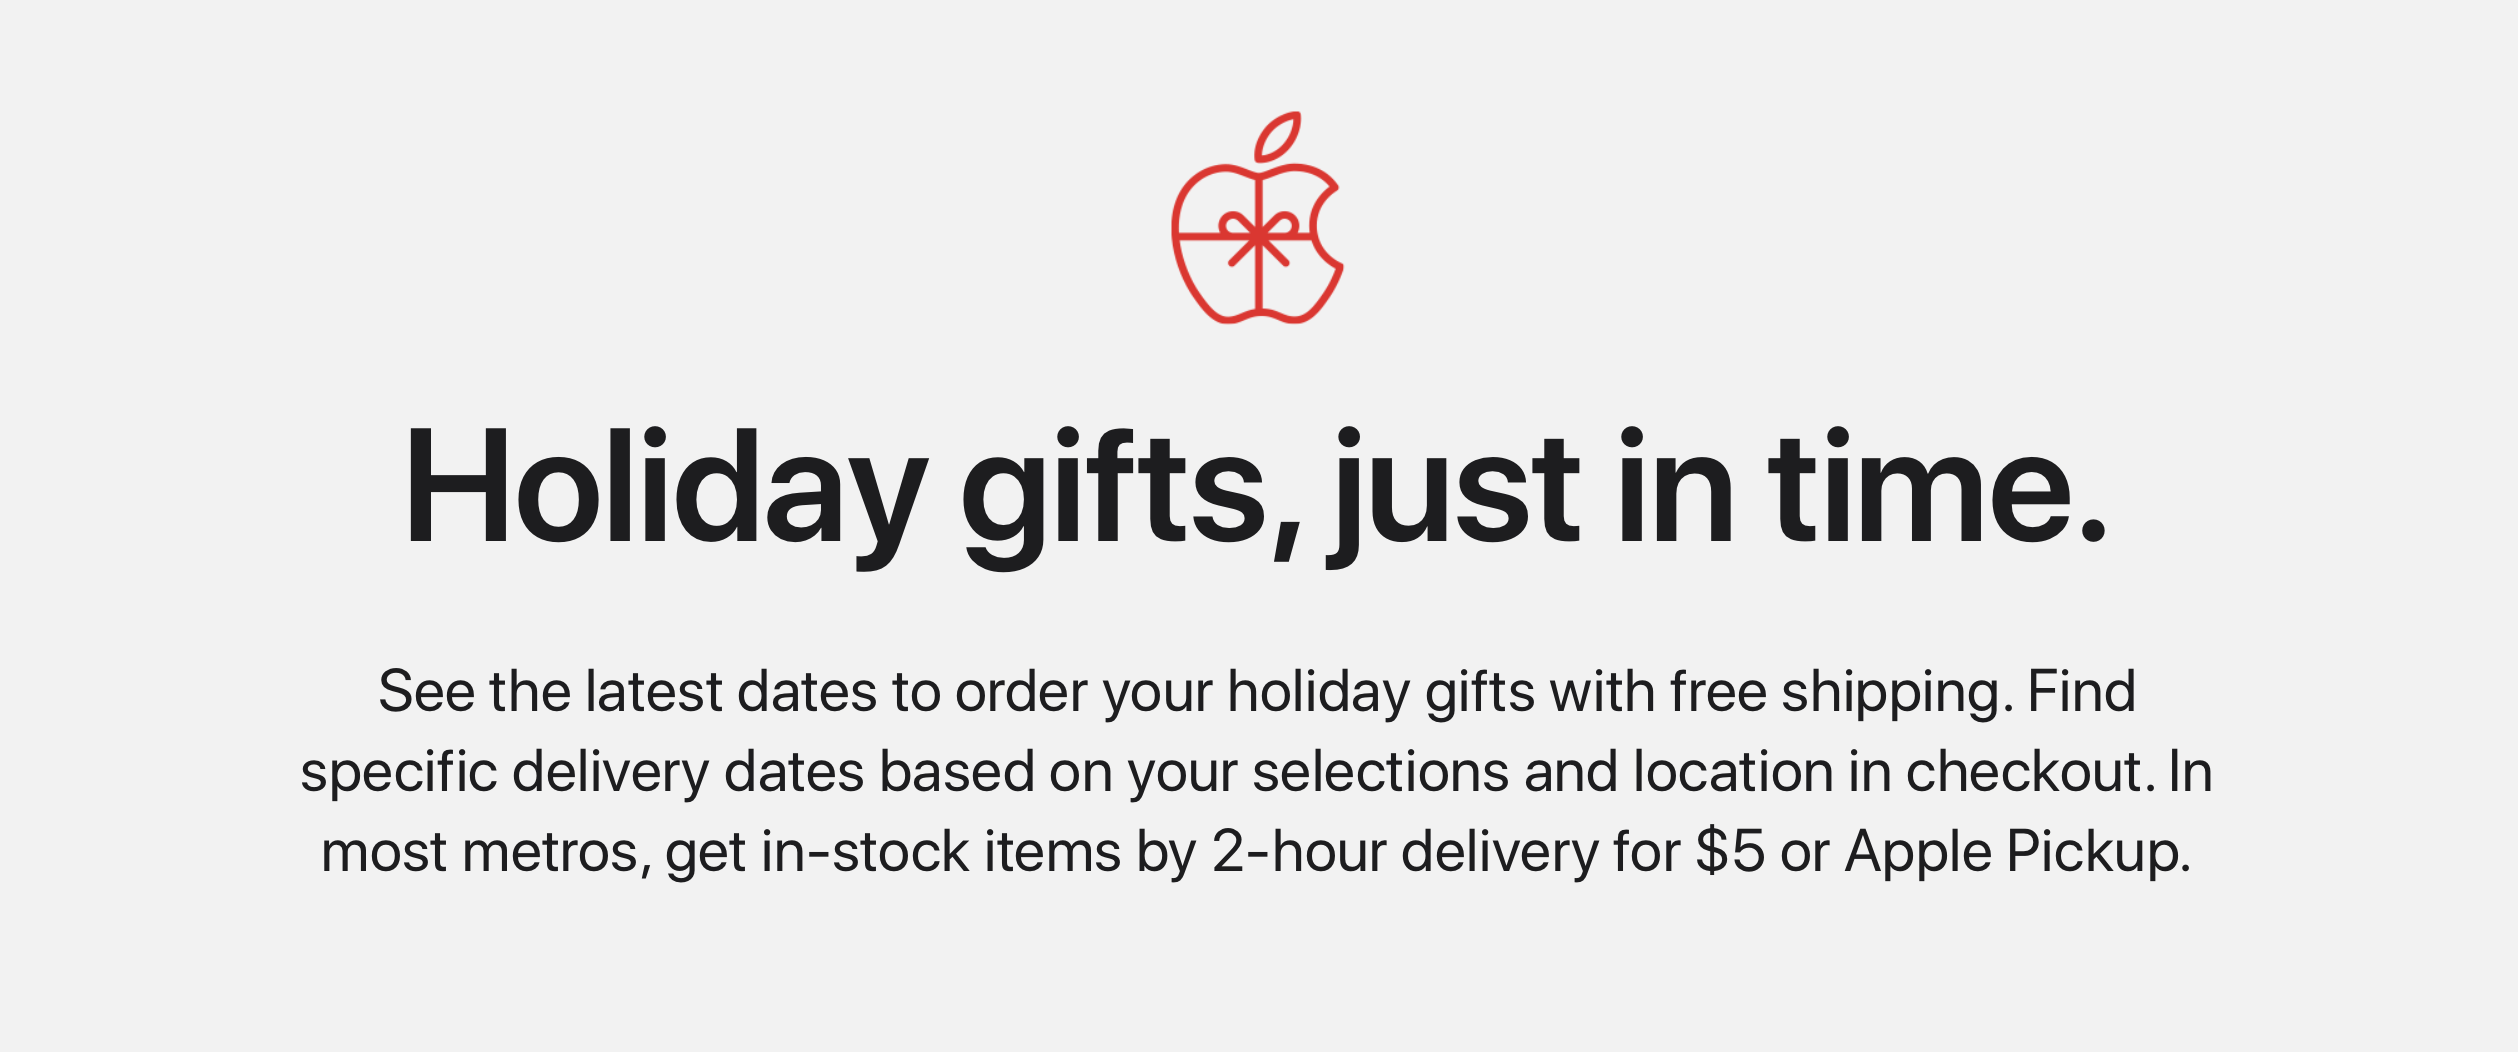 https://media.idownloadblog.com/wp-content/uploads/2020/12/Apple-holiday-2020-two-hour-delivery-promotion.png